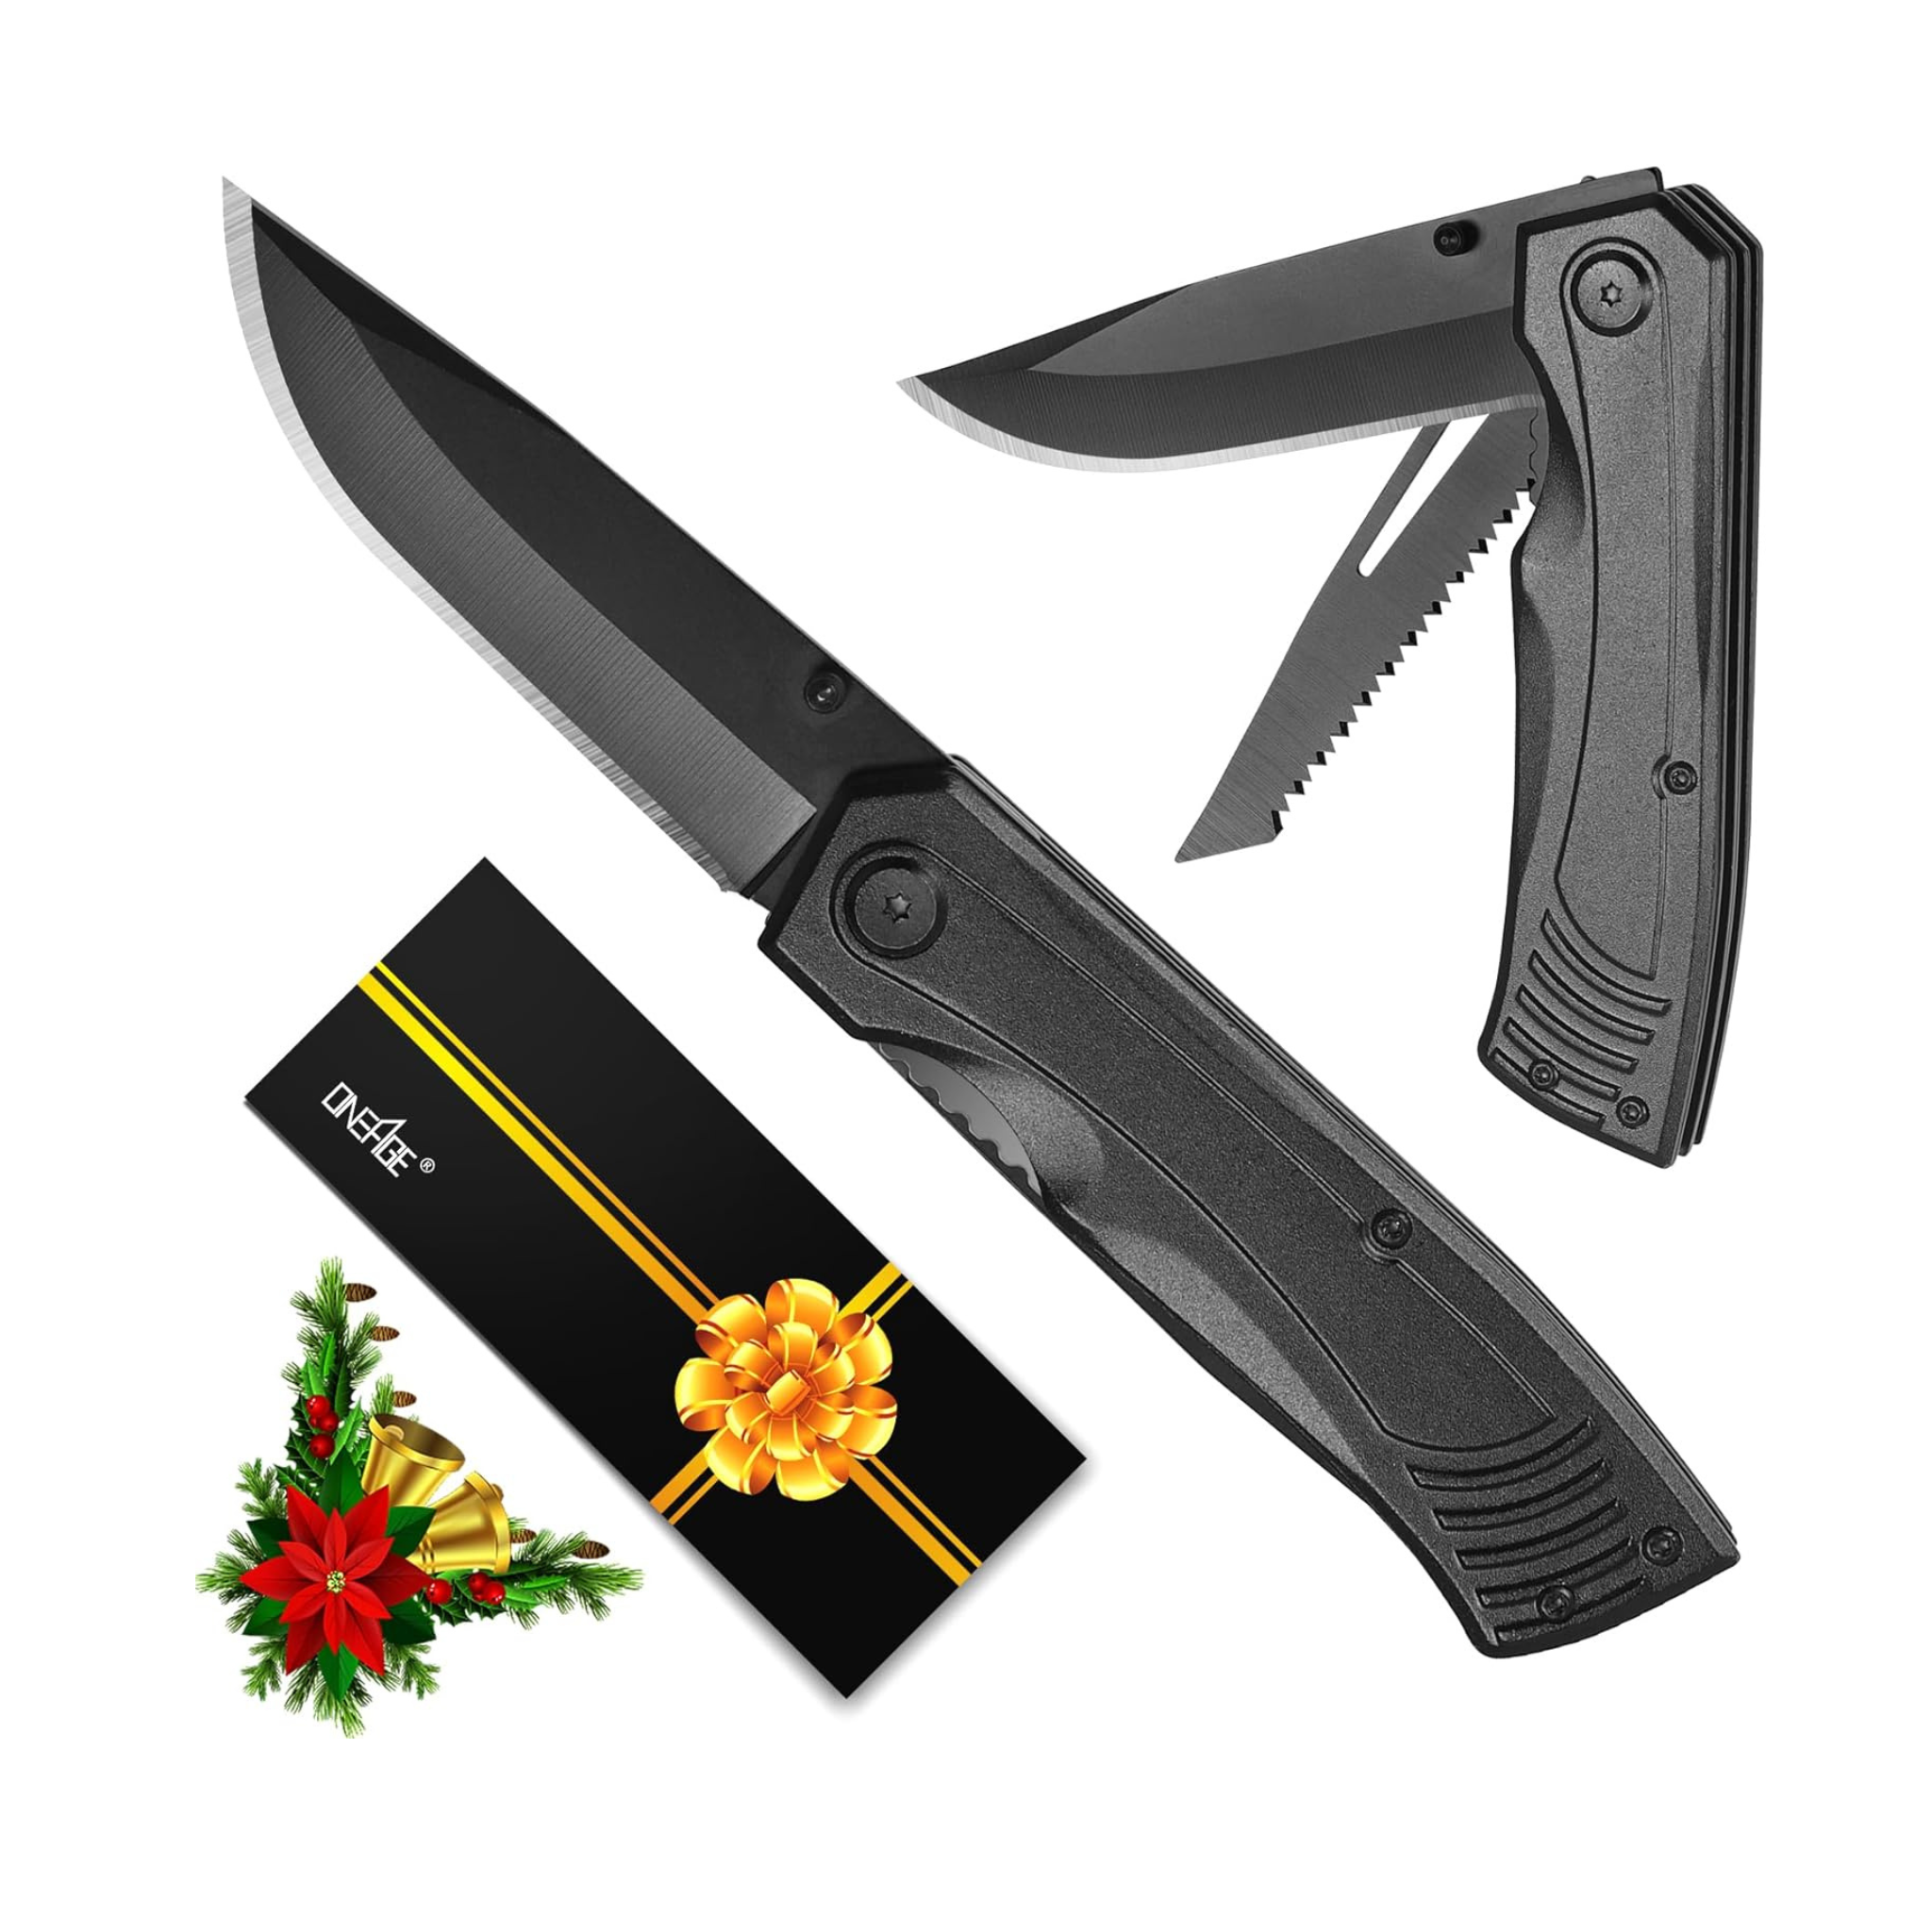 Oneage 2 In 1 Folding Knife Saw for Men